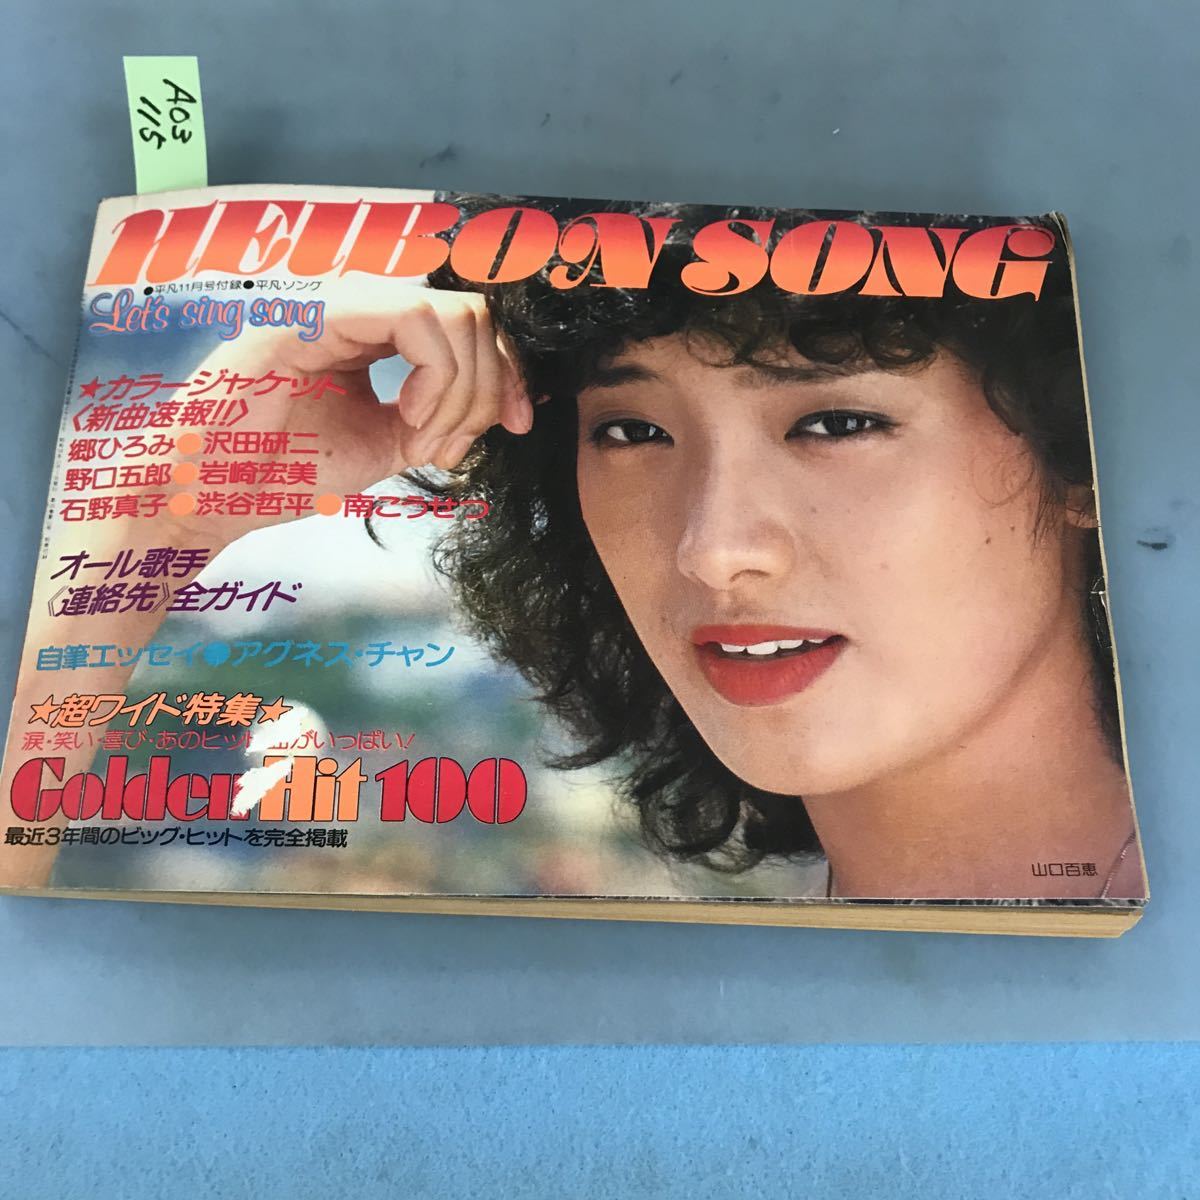 A03-115 Hebon Song LET'S SING SONG 1979 11 平凡11月号付録 破れあり。2ヶ所